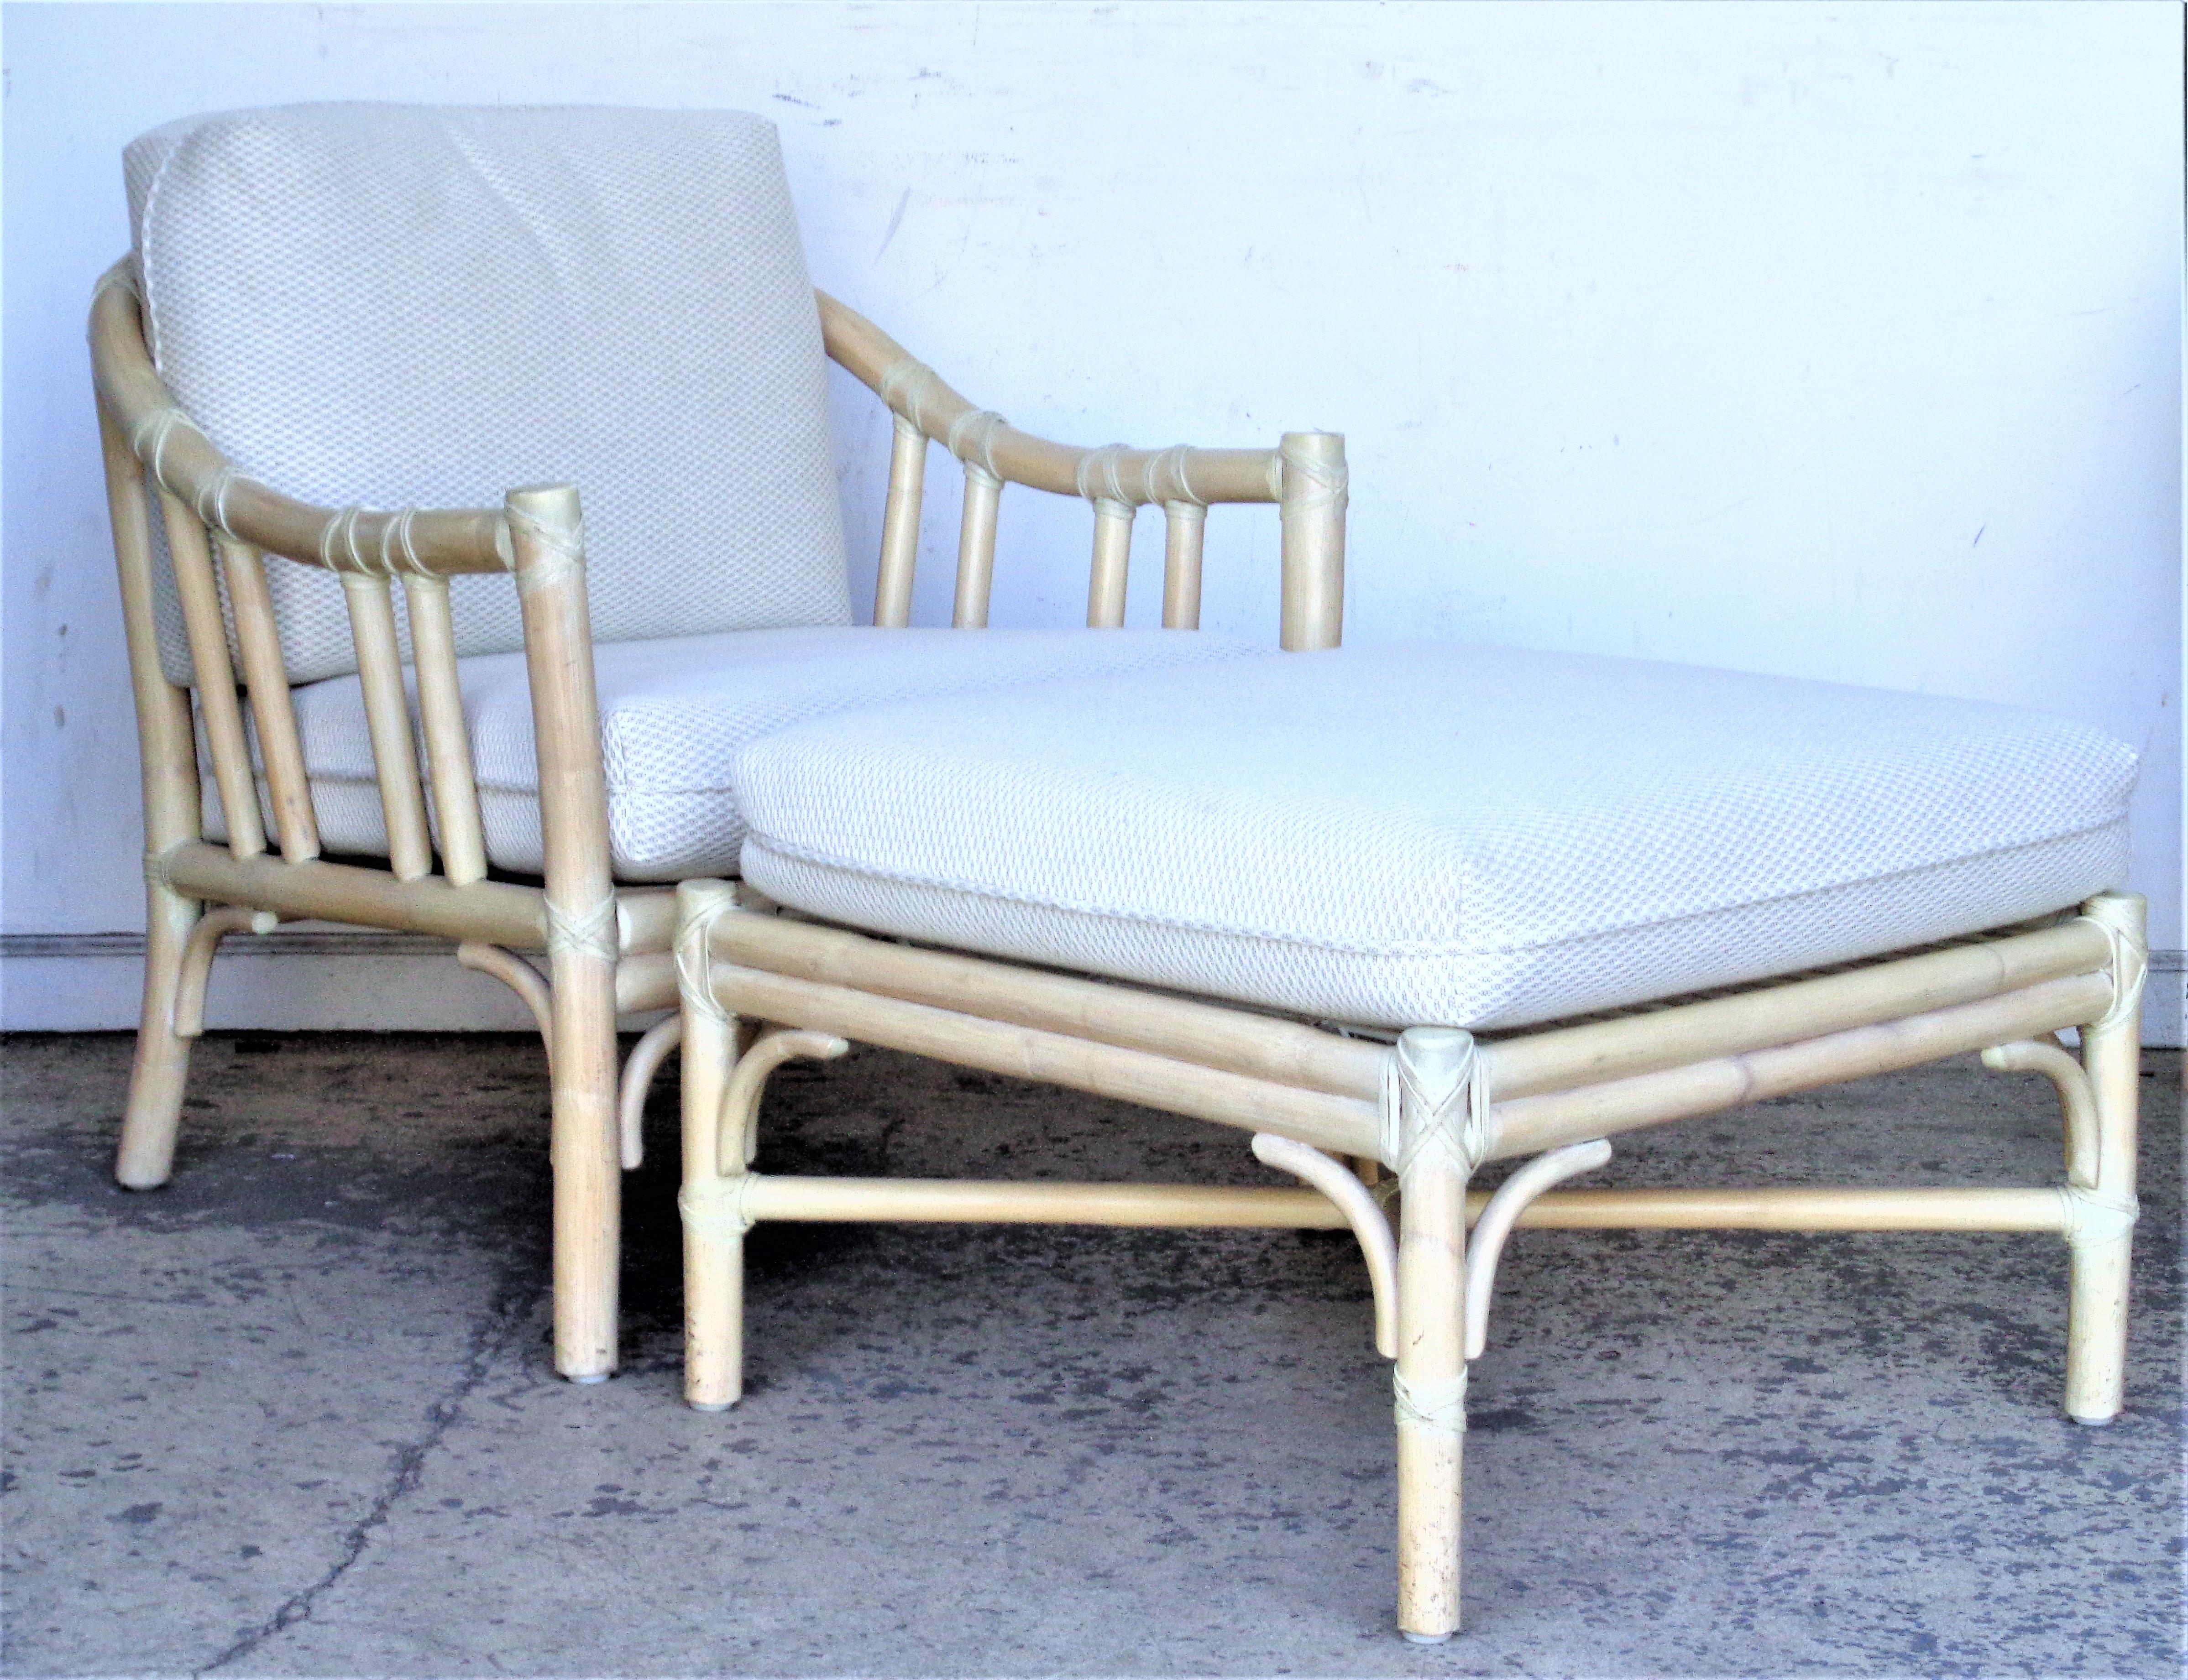 California organic modern style pair of large rattan and leather rawhide wrapped matching lounge chairs and ottoman in the original cerused factory finish by McGuire, San Francisco. The chairs with the original Made in Denmark Rotex rubber straps.